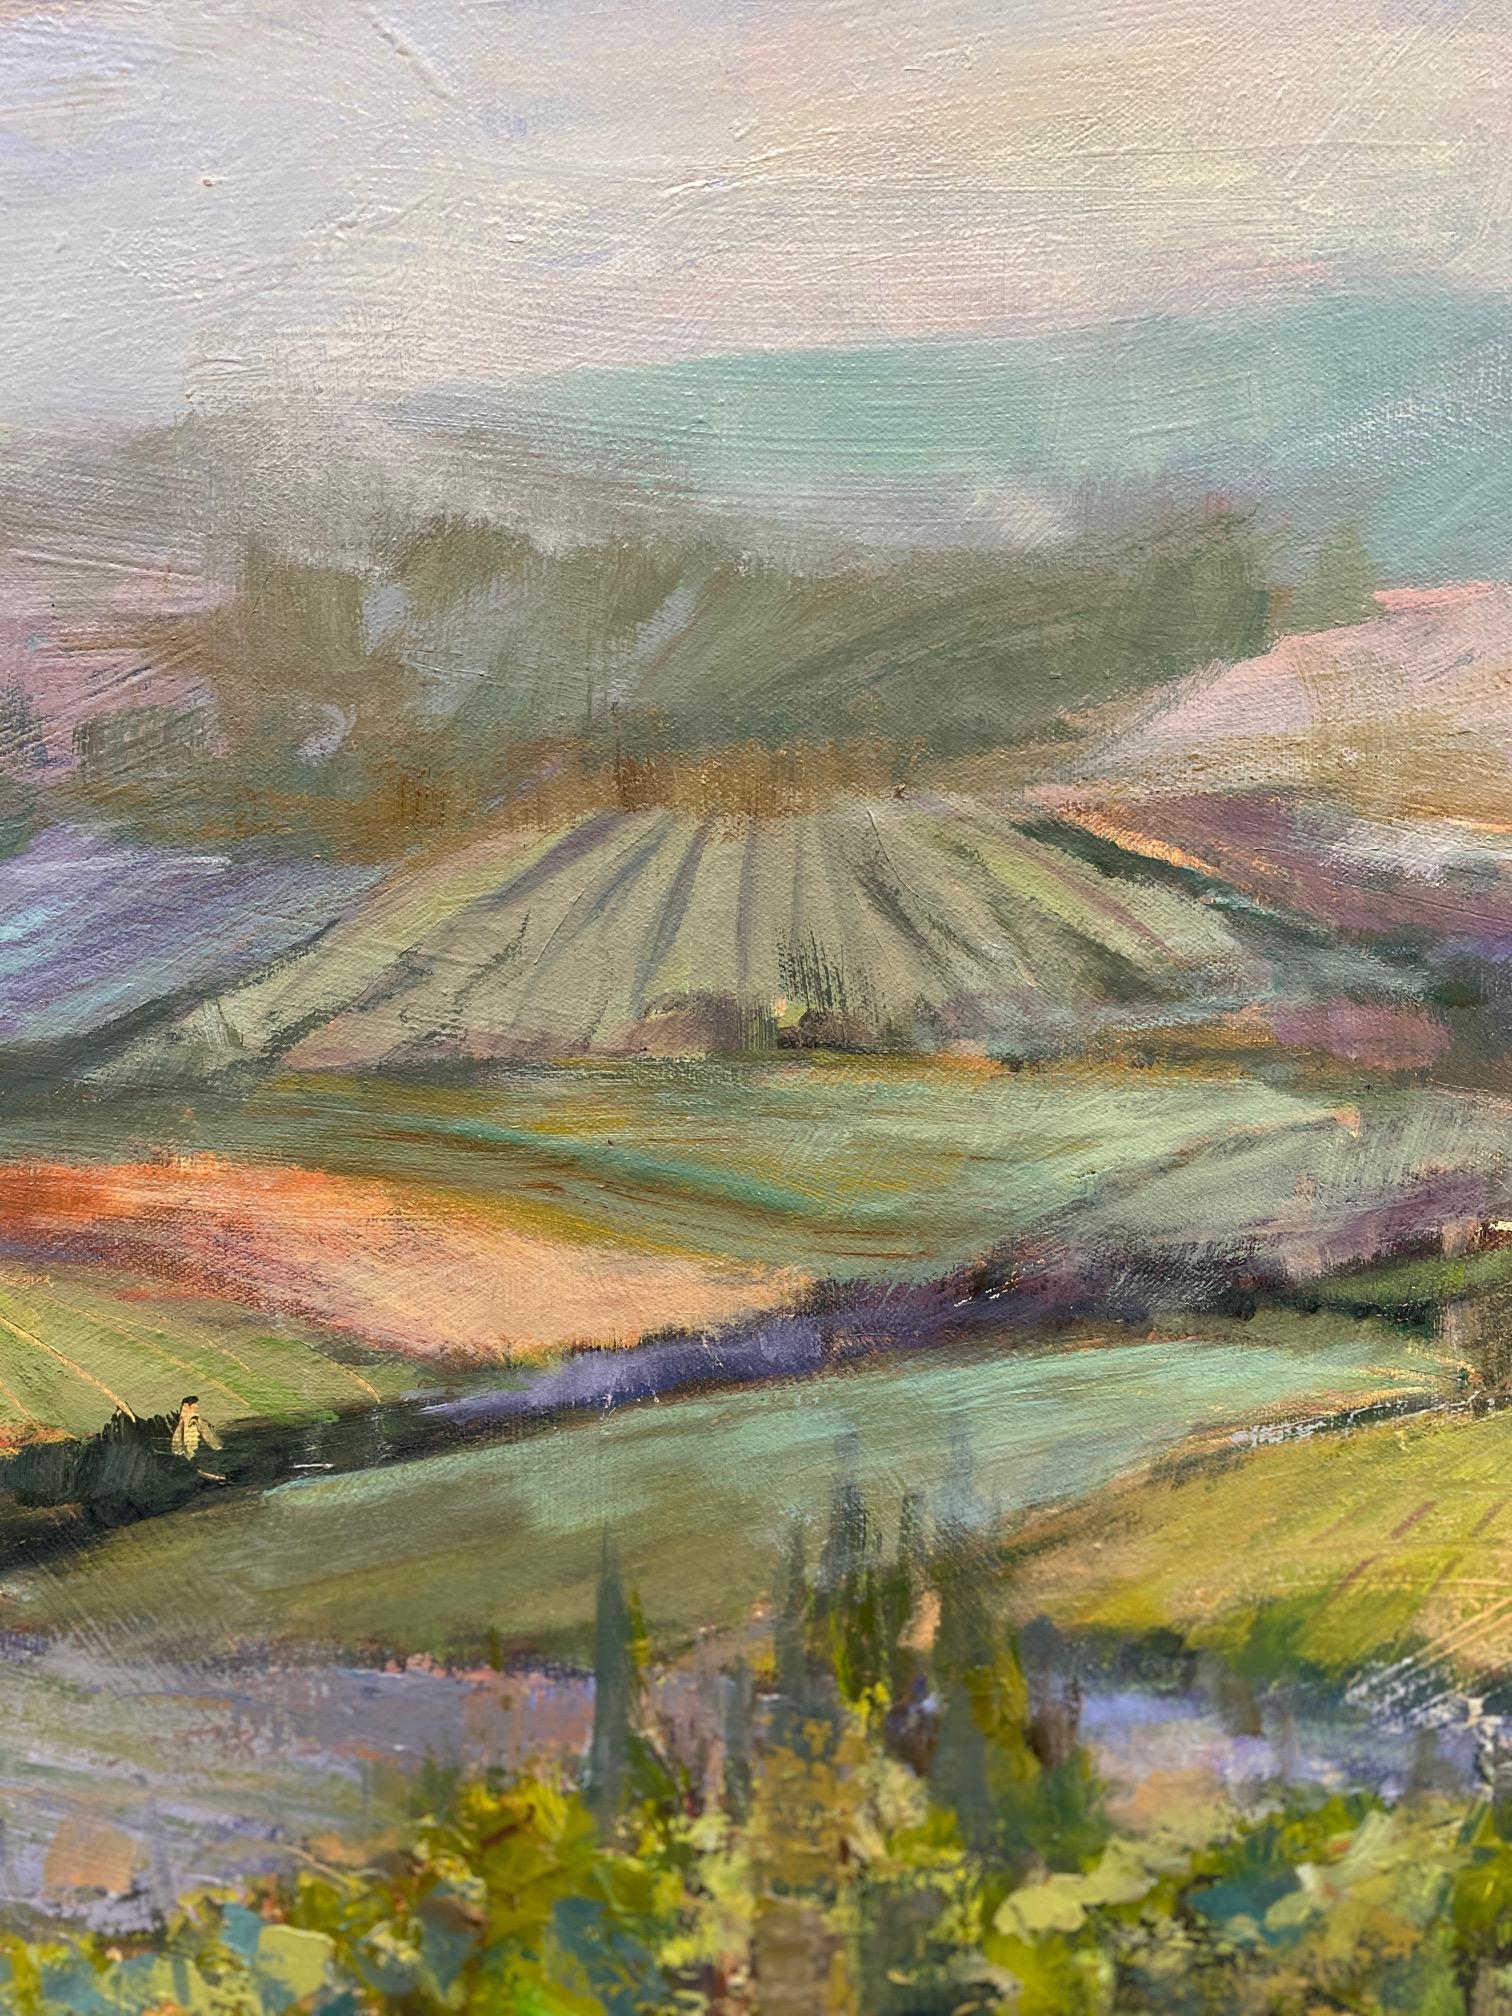 The Hills Are Alive rings true to all wine lovers with a passion for  exploring the earthy, elegant world of wine cultivating and collecting North Carolina artist Allison Chambers' extensive use of  palette knife lifts the oil paint above the